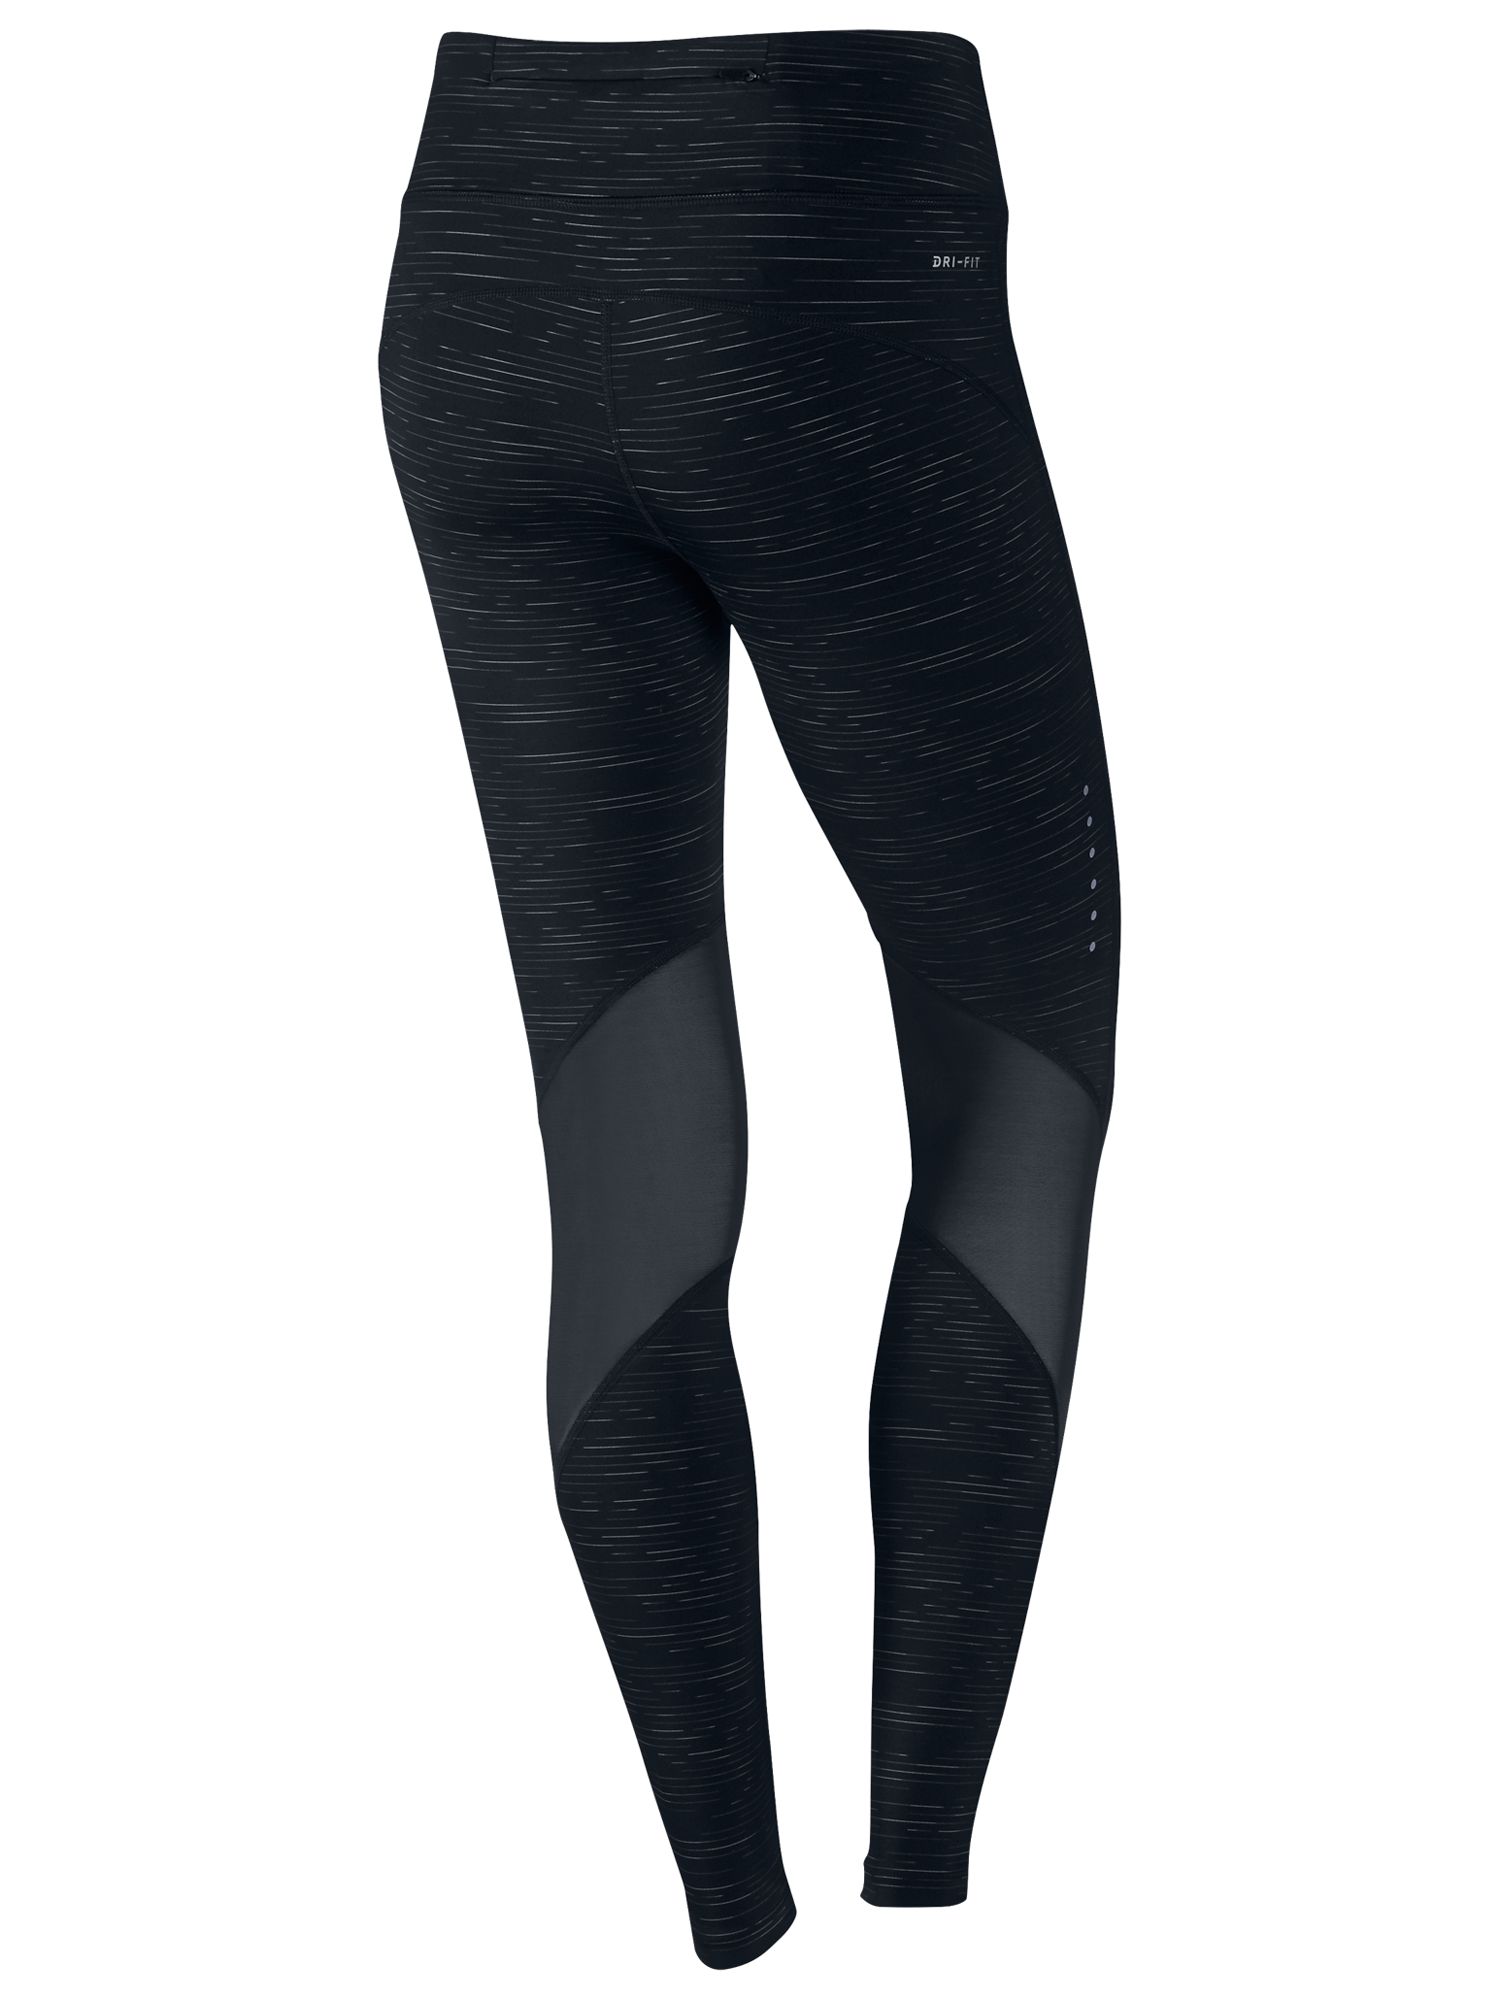 nike power epic lux tight